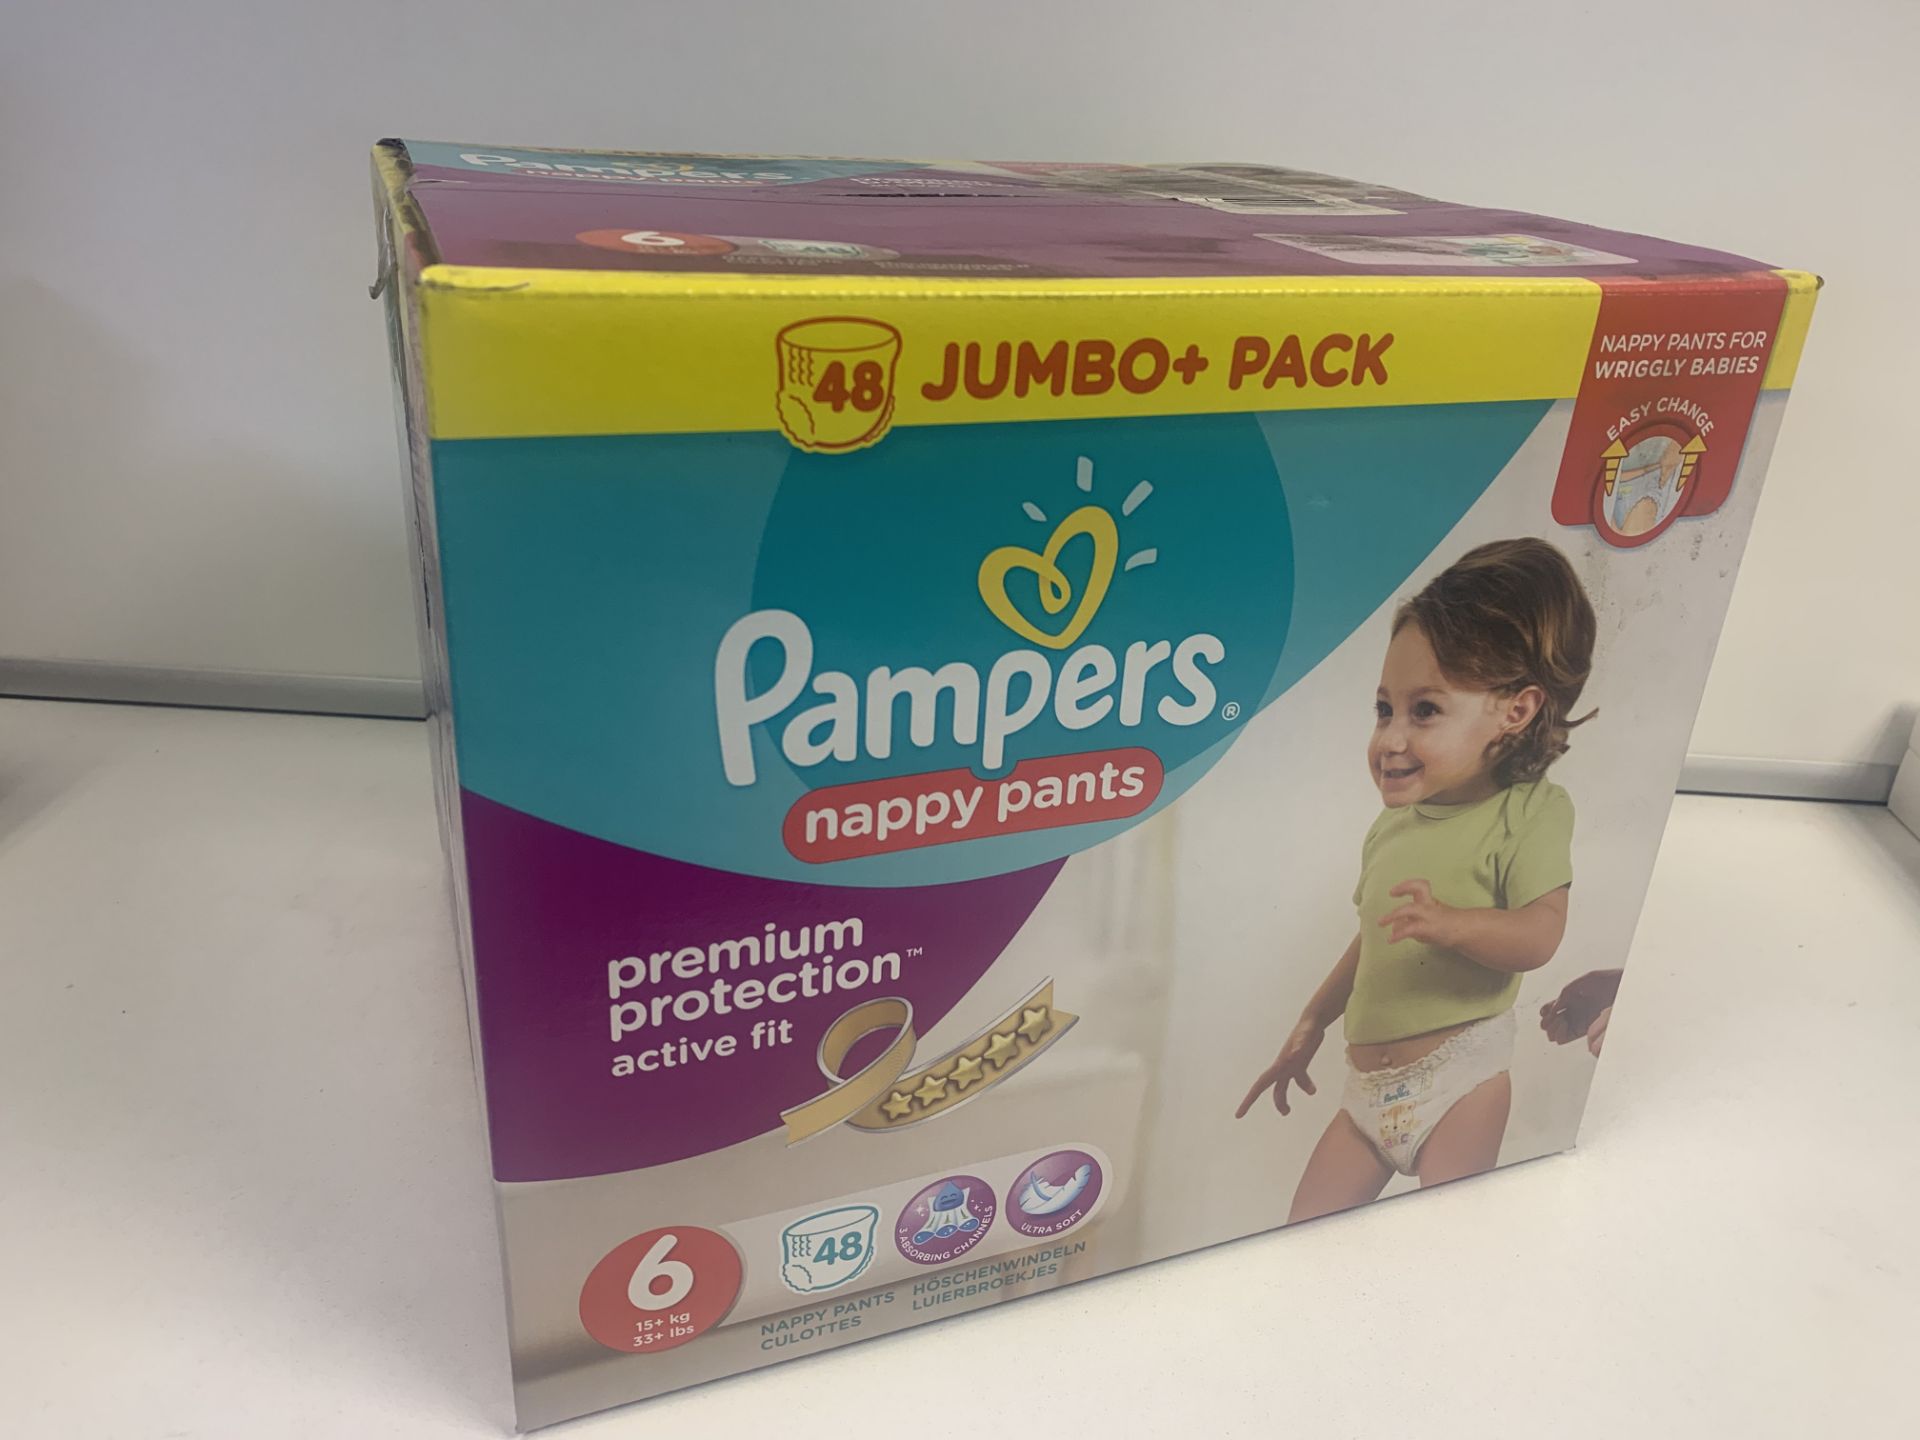 20 X BRAND NEW PAMPERS 48 JUMBO PACK NAPPY PANTS SIZE 6